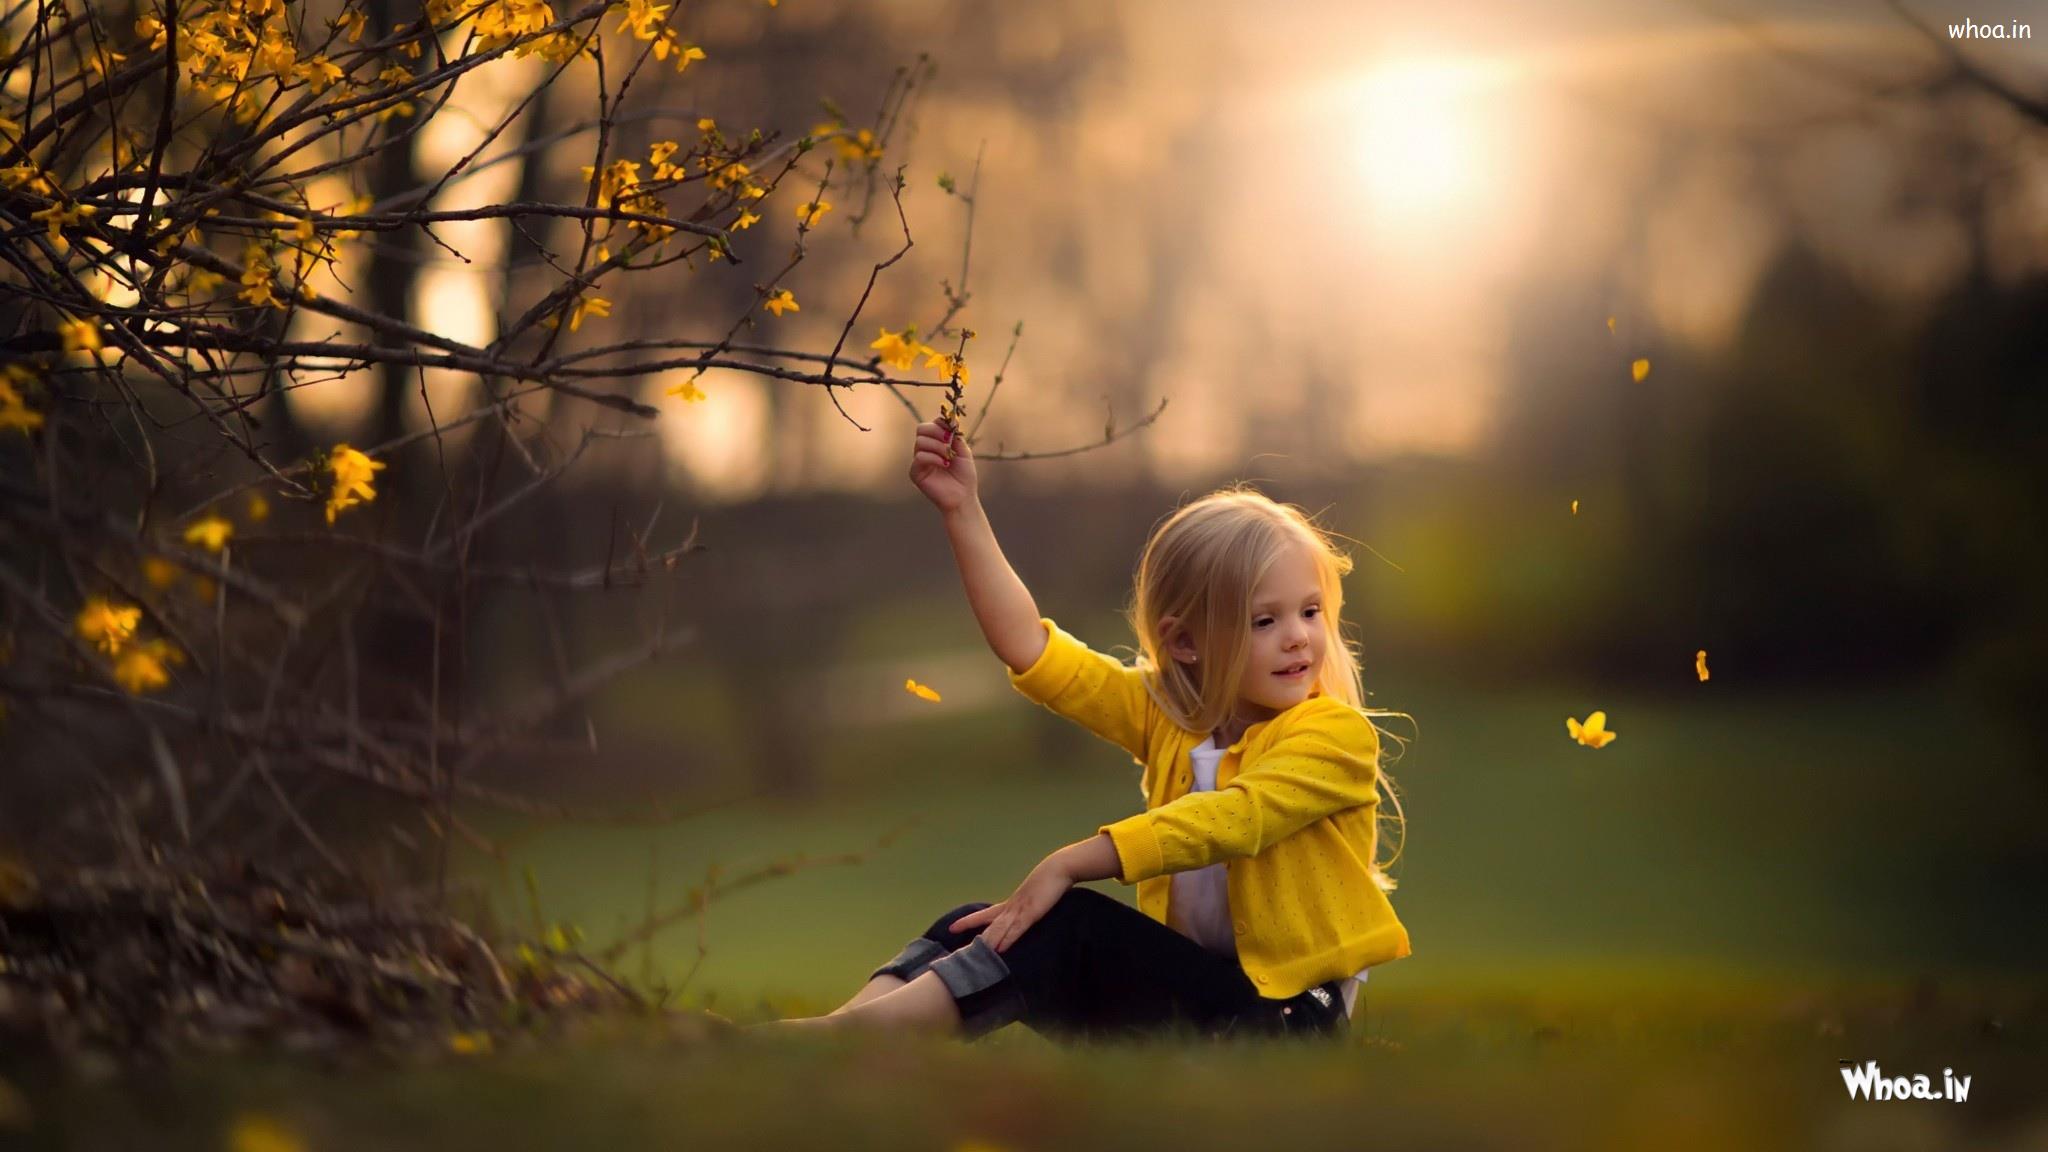 baby wallpaper hd,people in nature,nature,photograph,yellow,sky